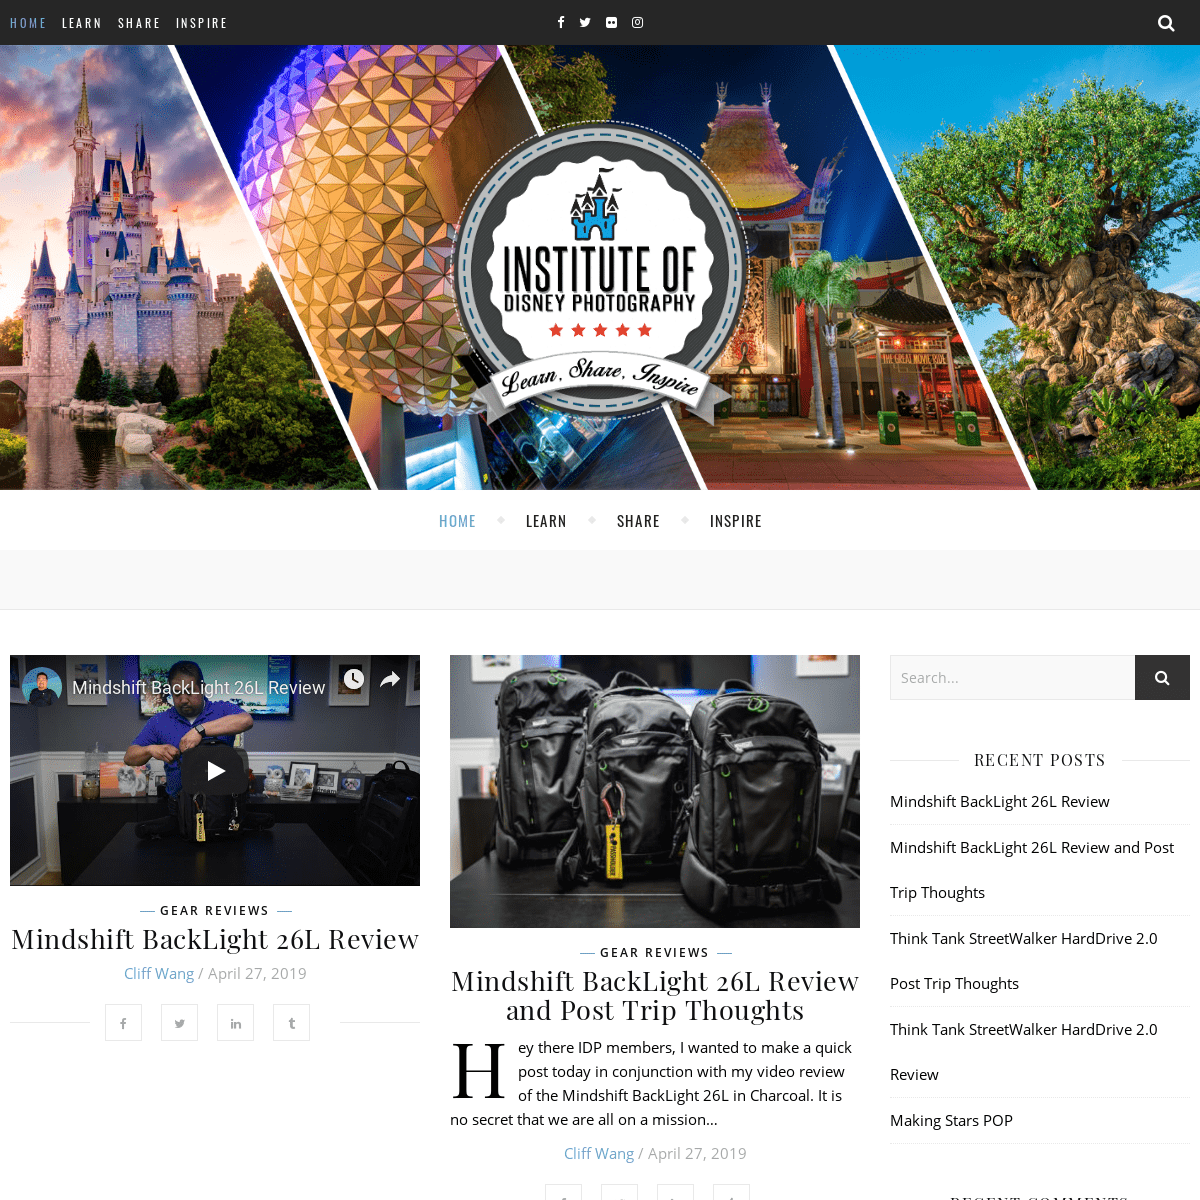 Institute of Disney Photography – Learn, Share, Inspire